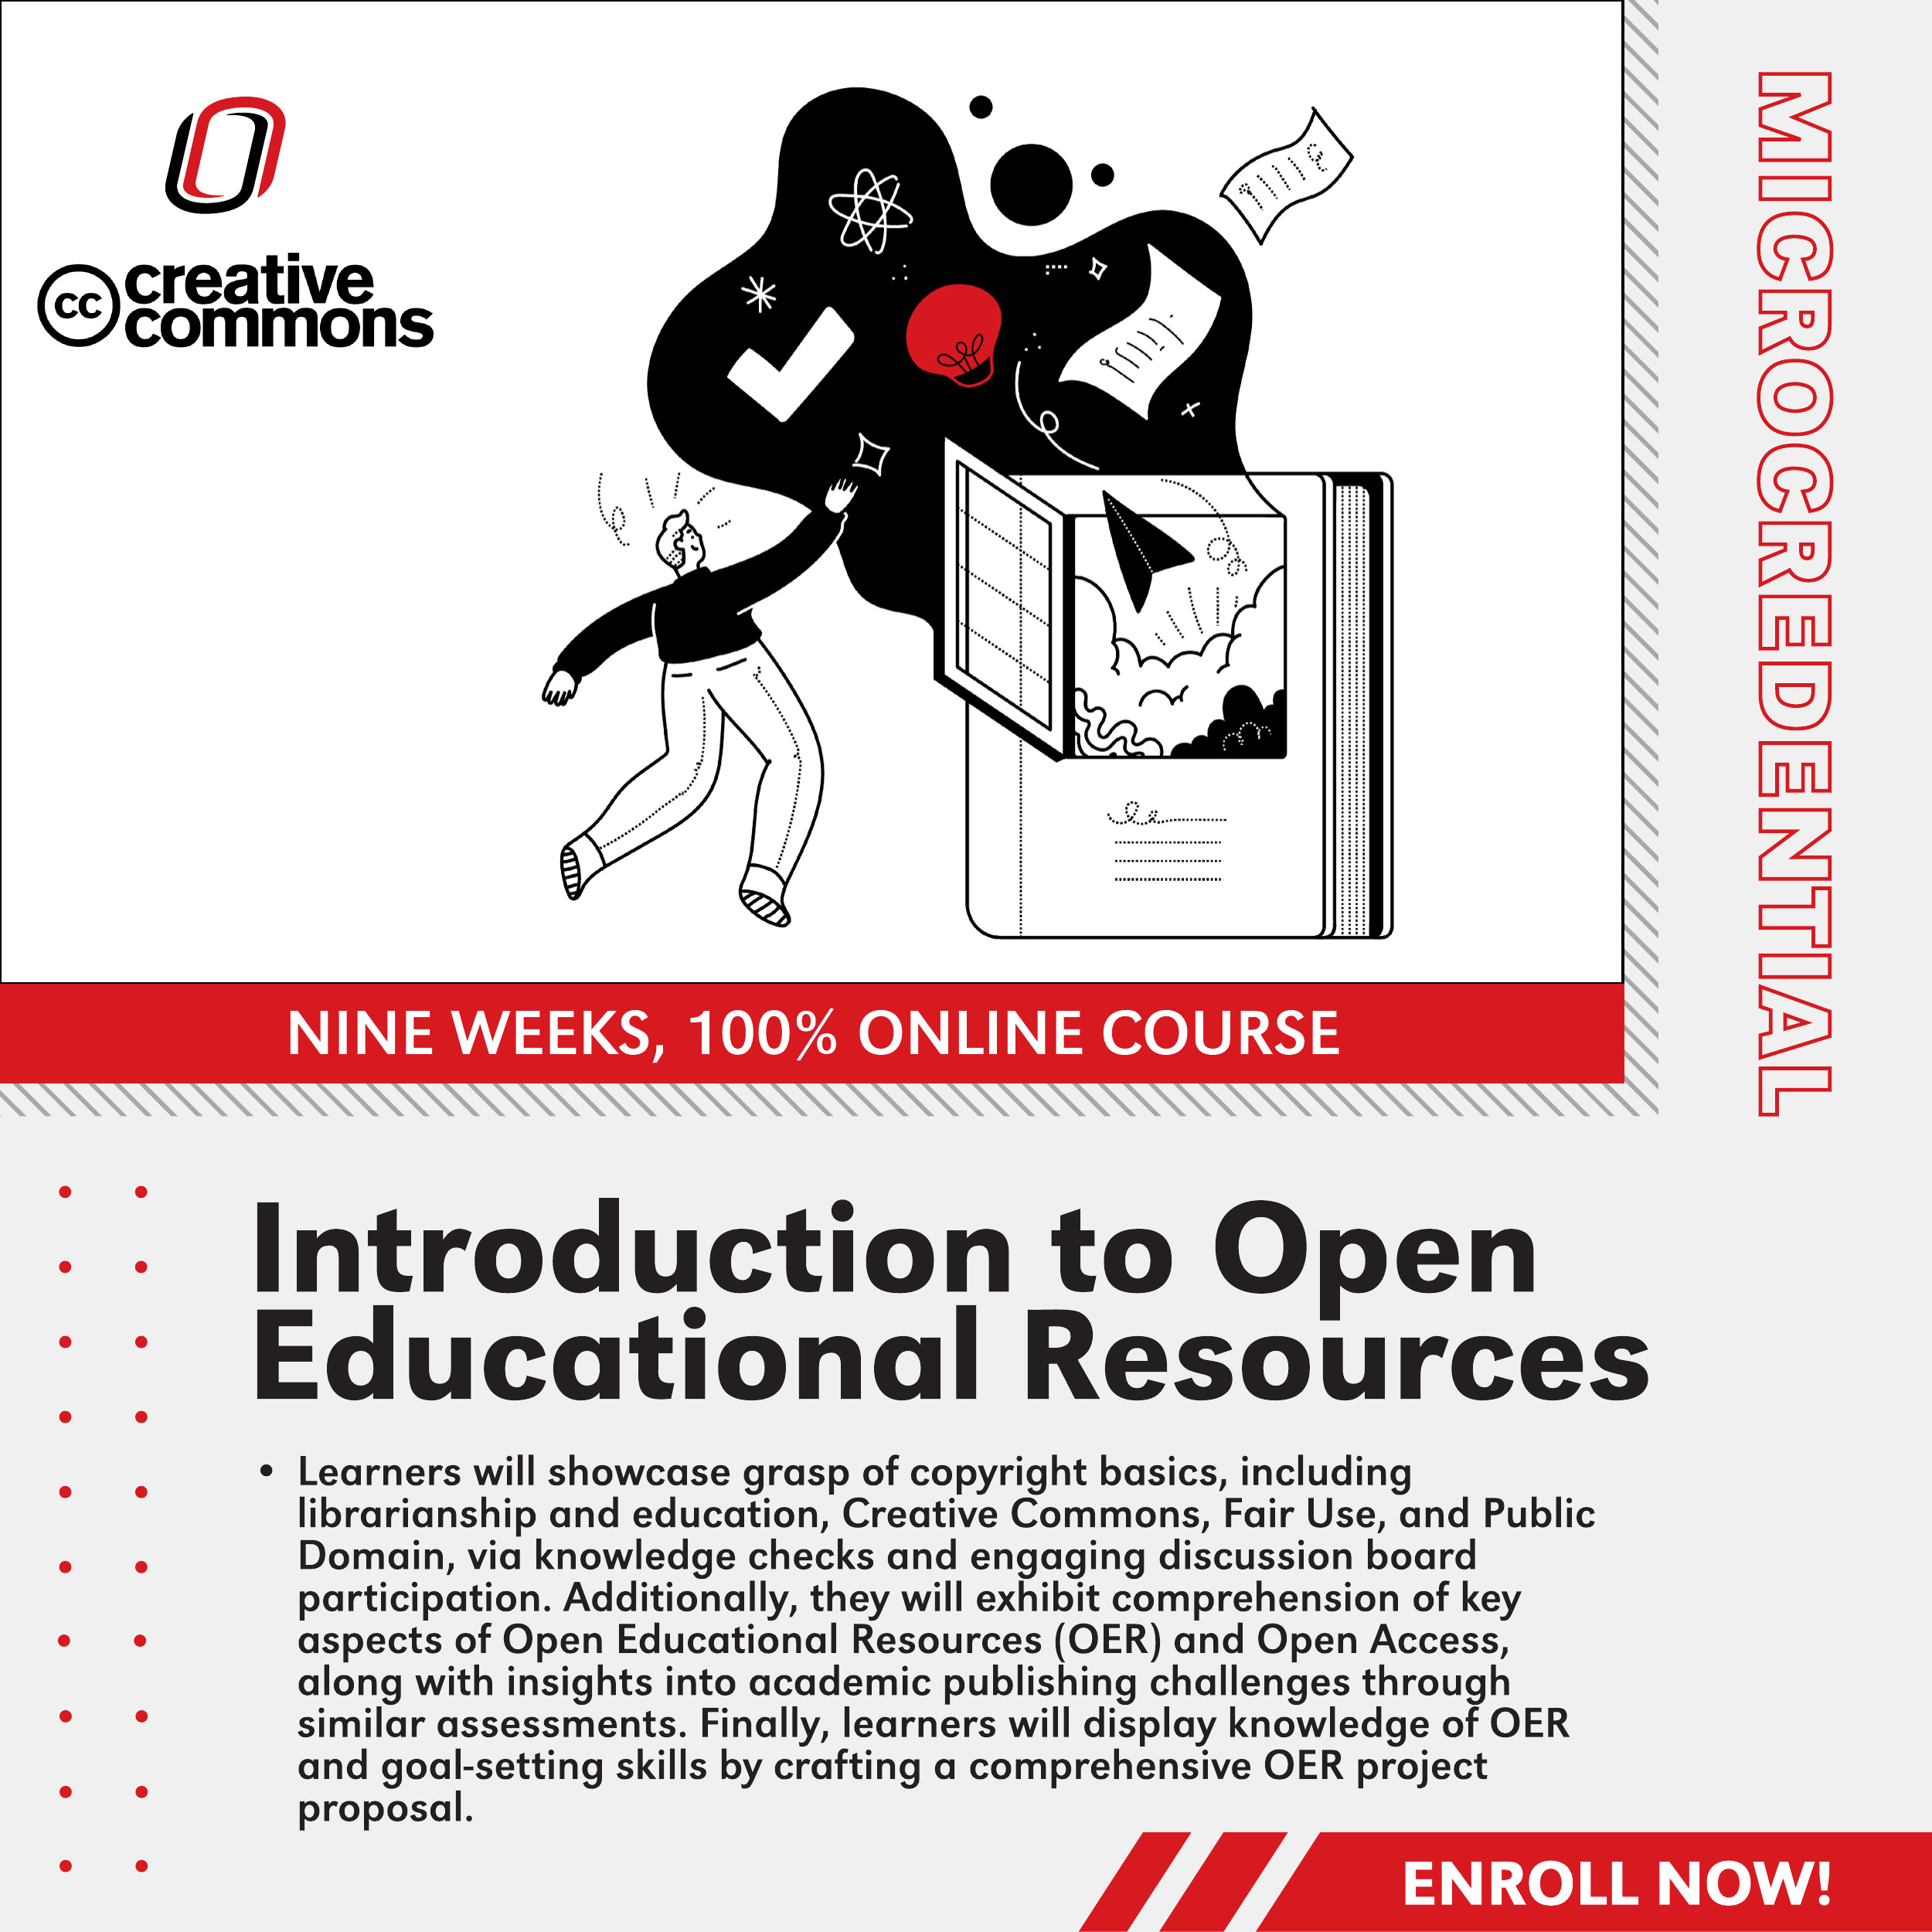 poster for Introduction to Open Educational Resources featuring image of a person reaching for images associated with learning, flowing out of a book on the right. Images include a check mark, paper, light bulb band atom symbol.